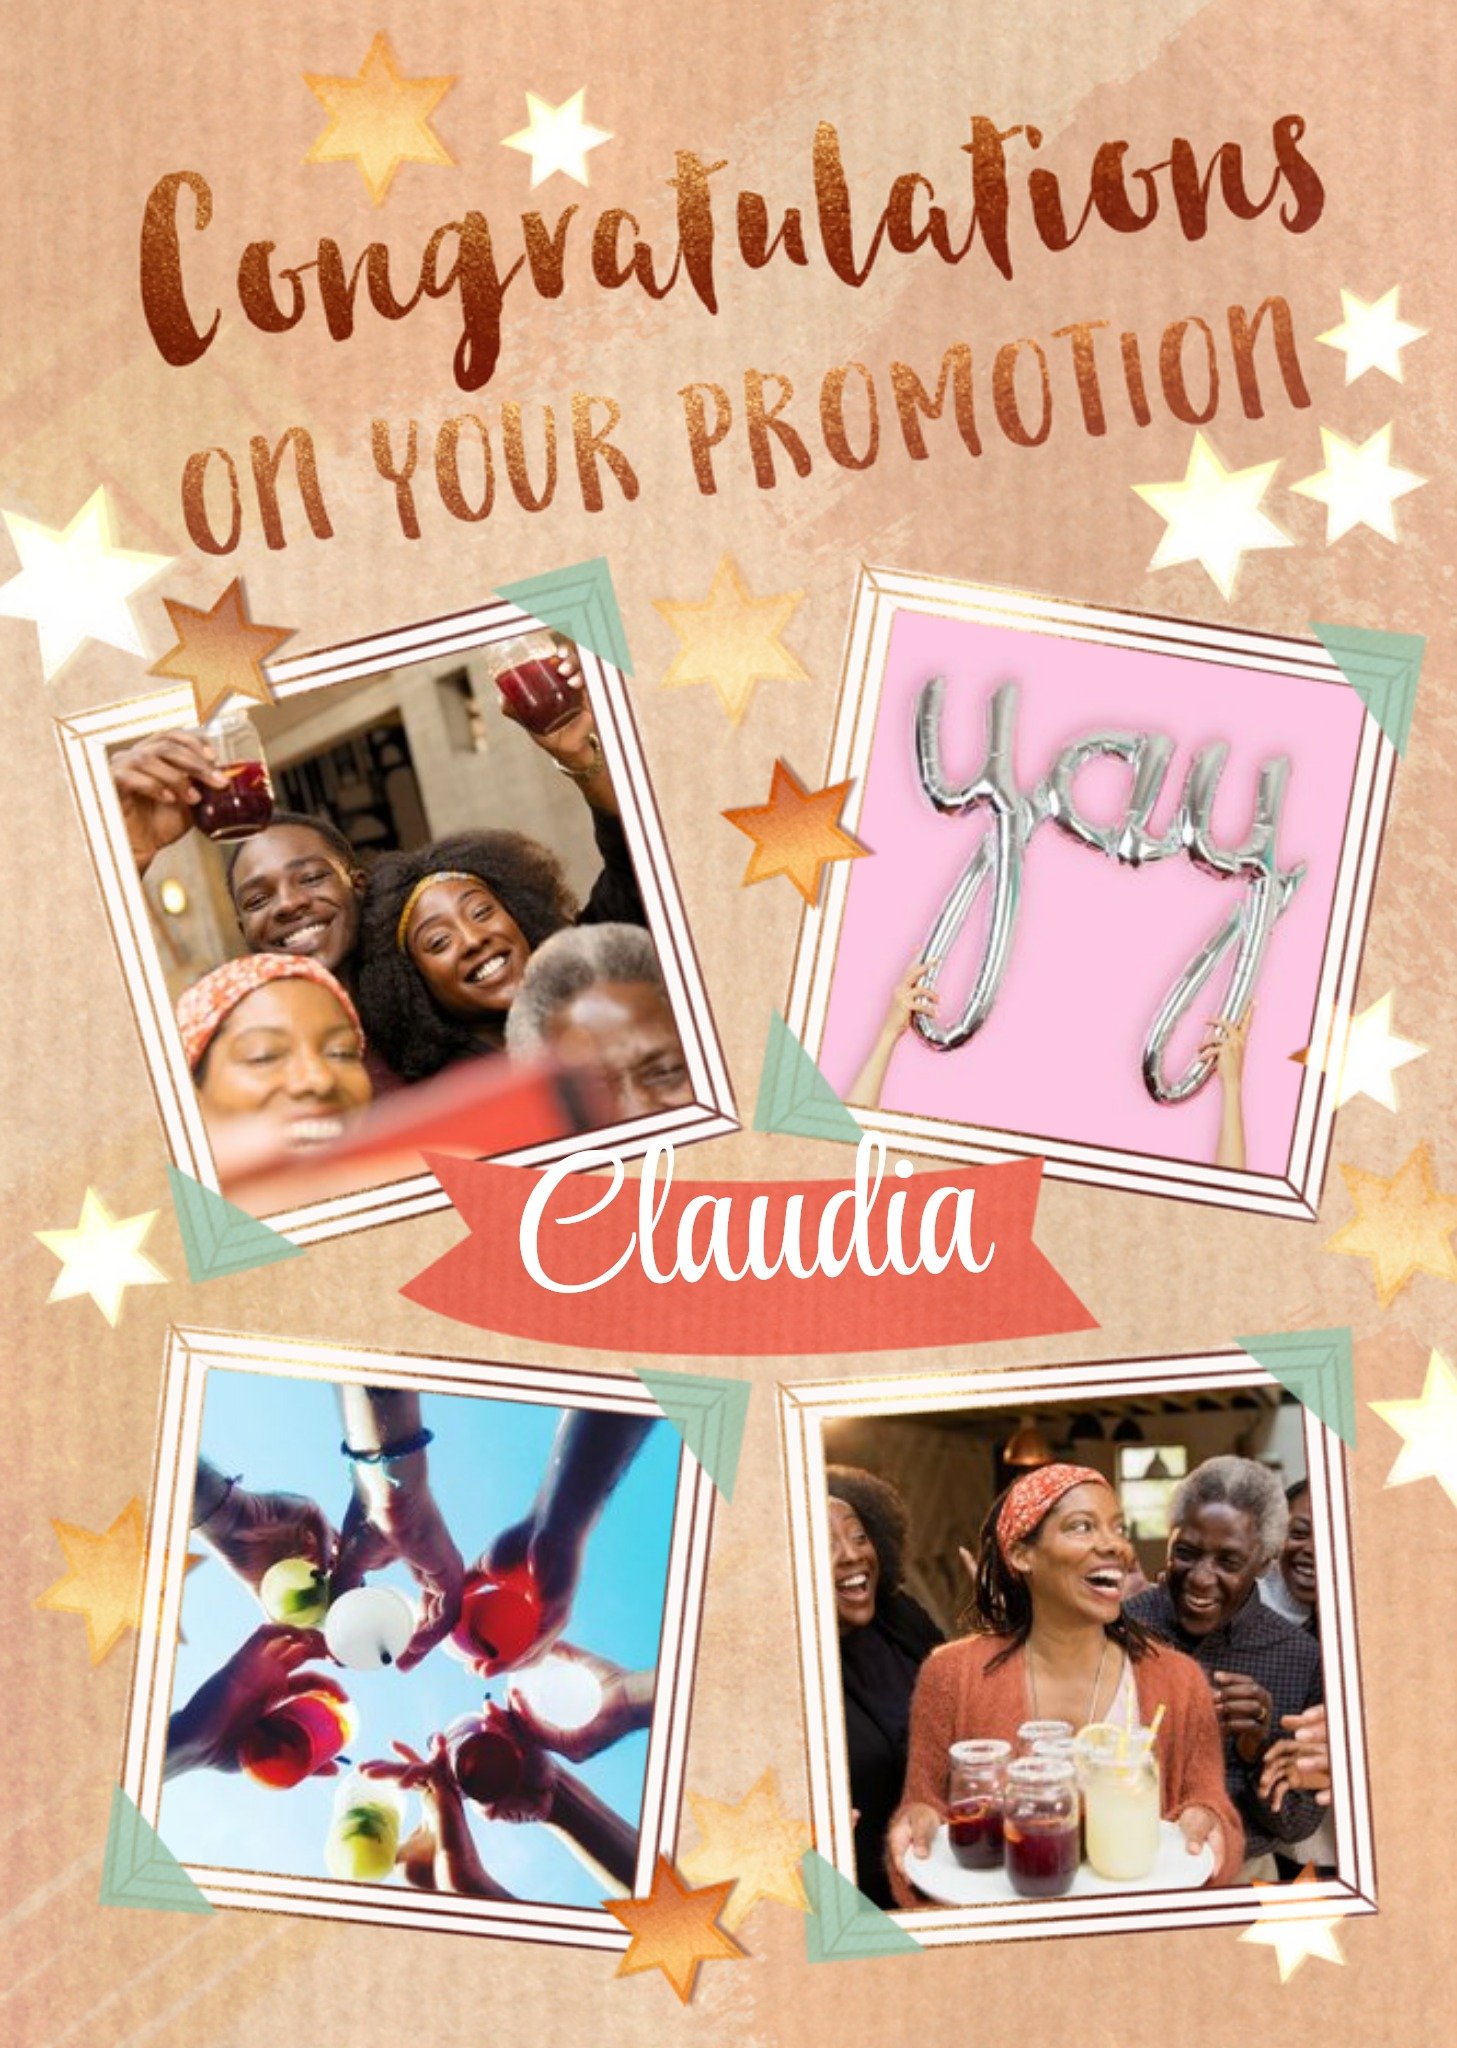 Moonpig Congratulations On Your Promotion Photo Upload Typographic Design Card, Large